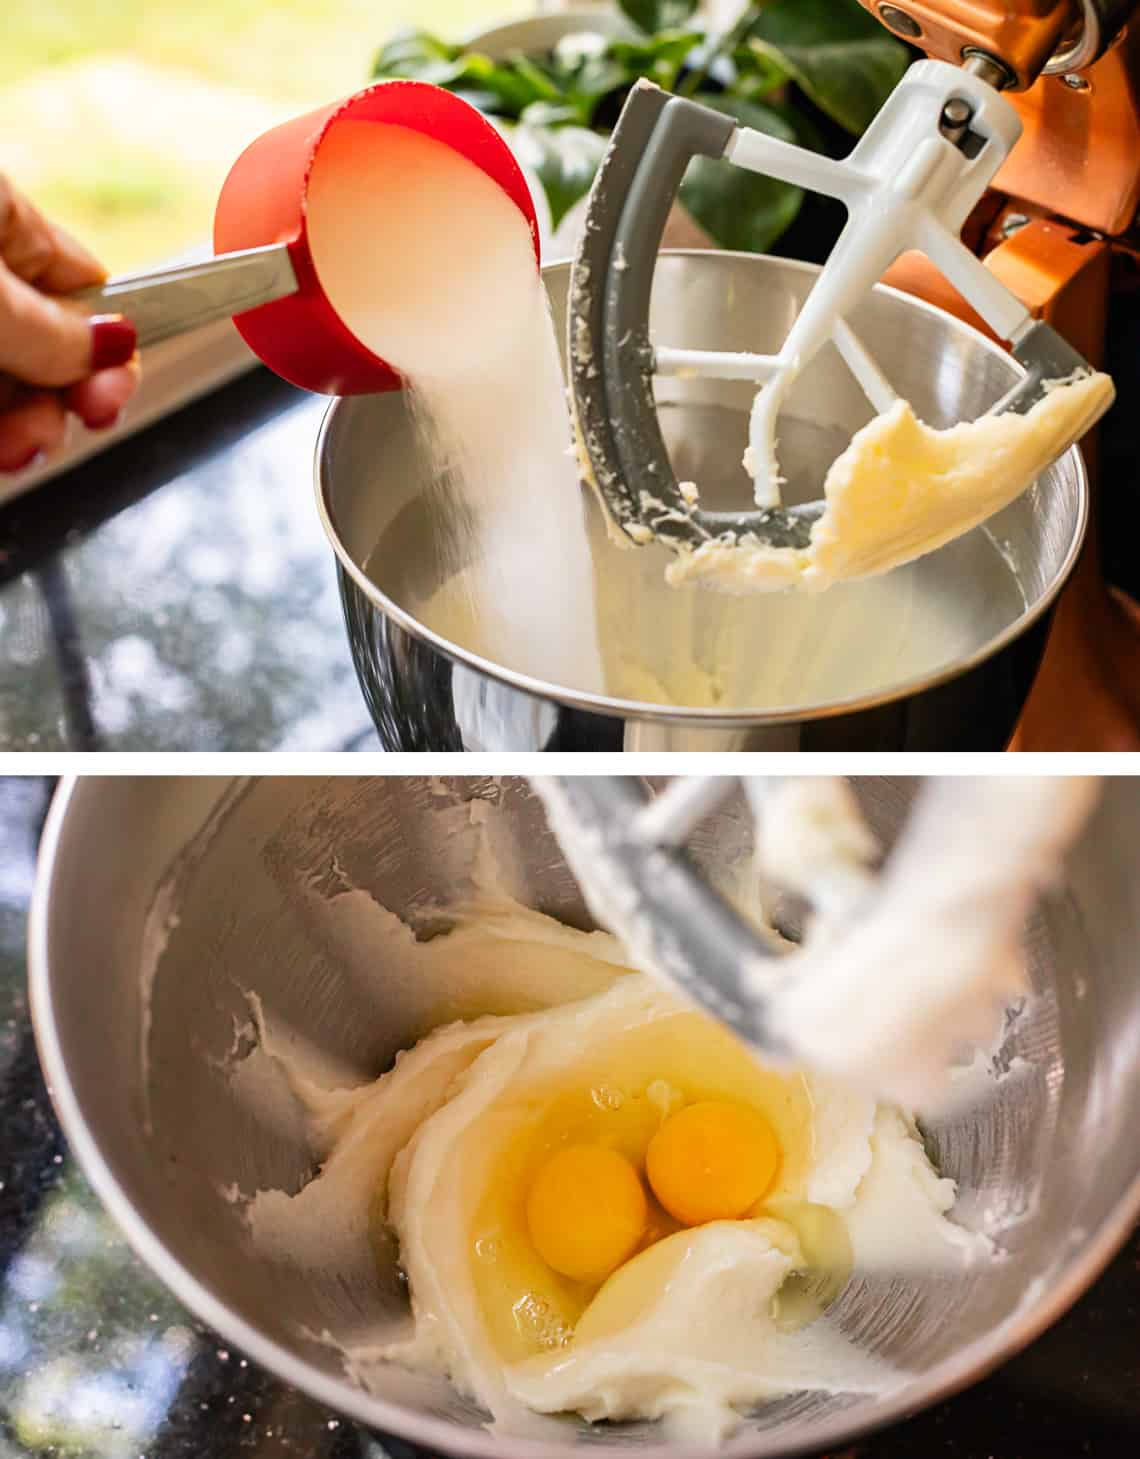 top pouring sugar into the mixing bowl bottom two cracked eggs in the mixing bowl.